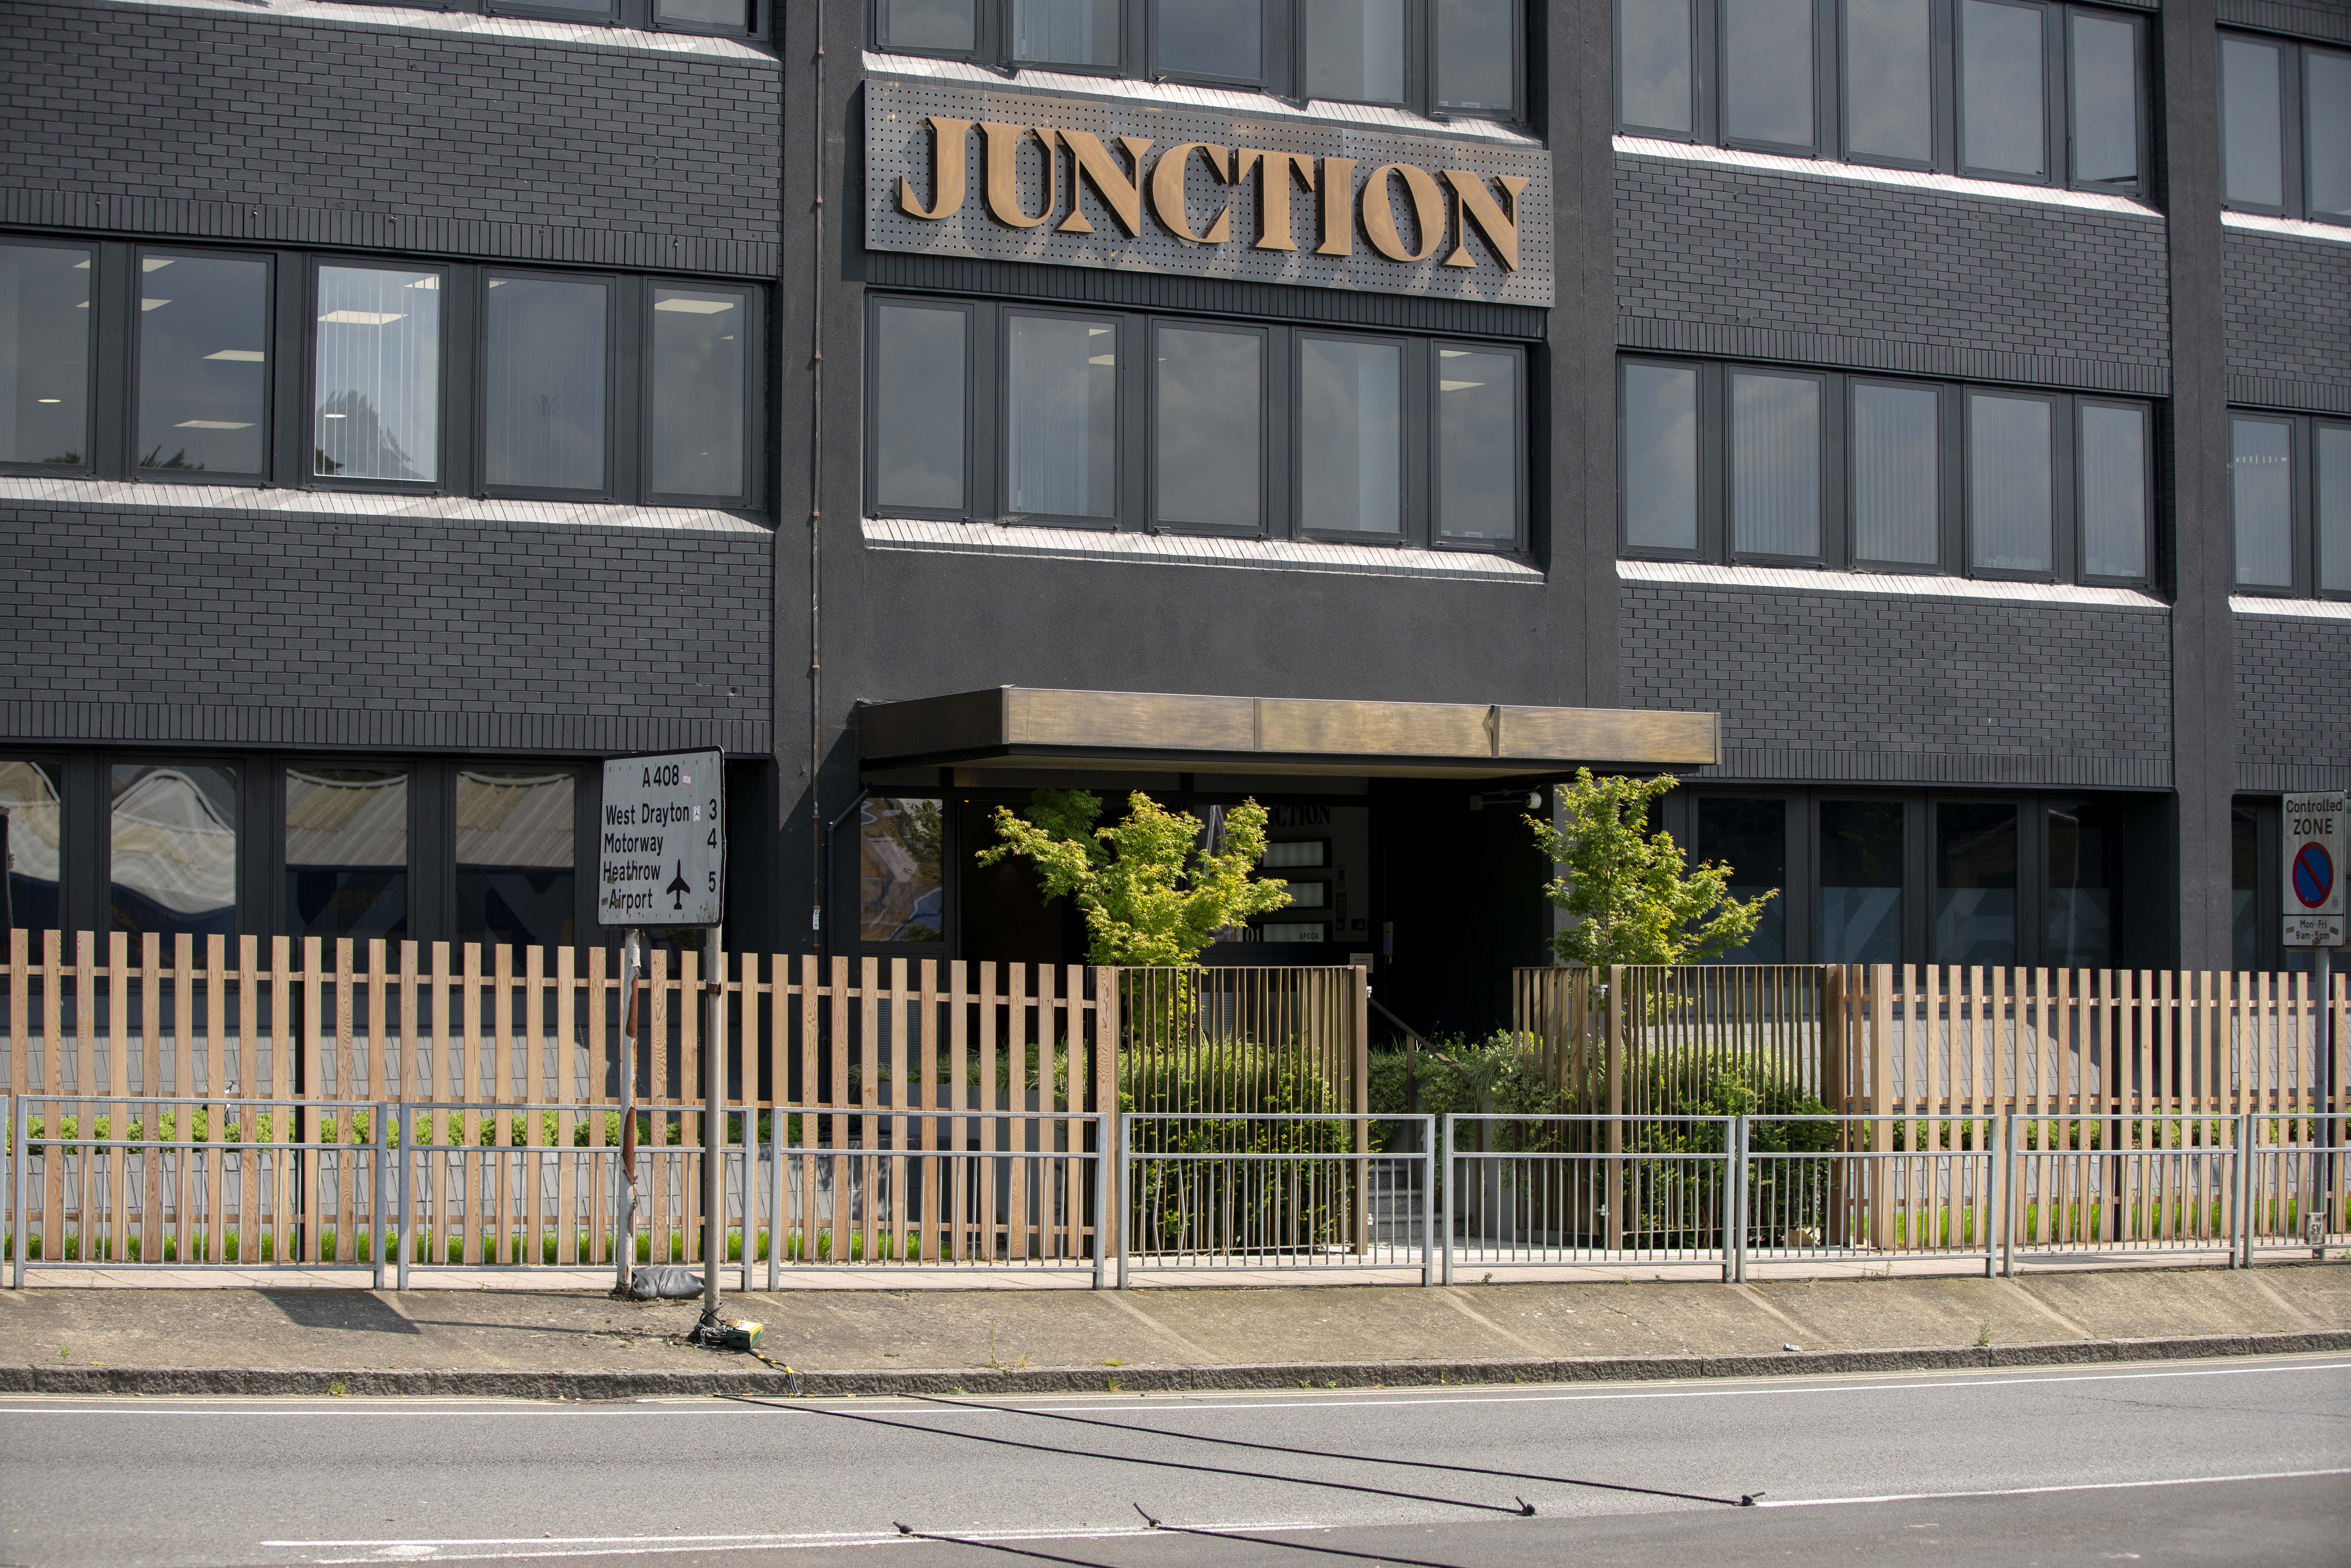 BSR Software takes space at The Junction